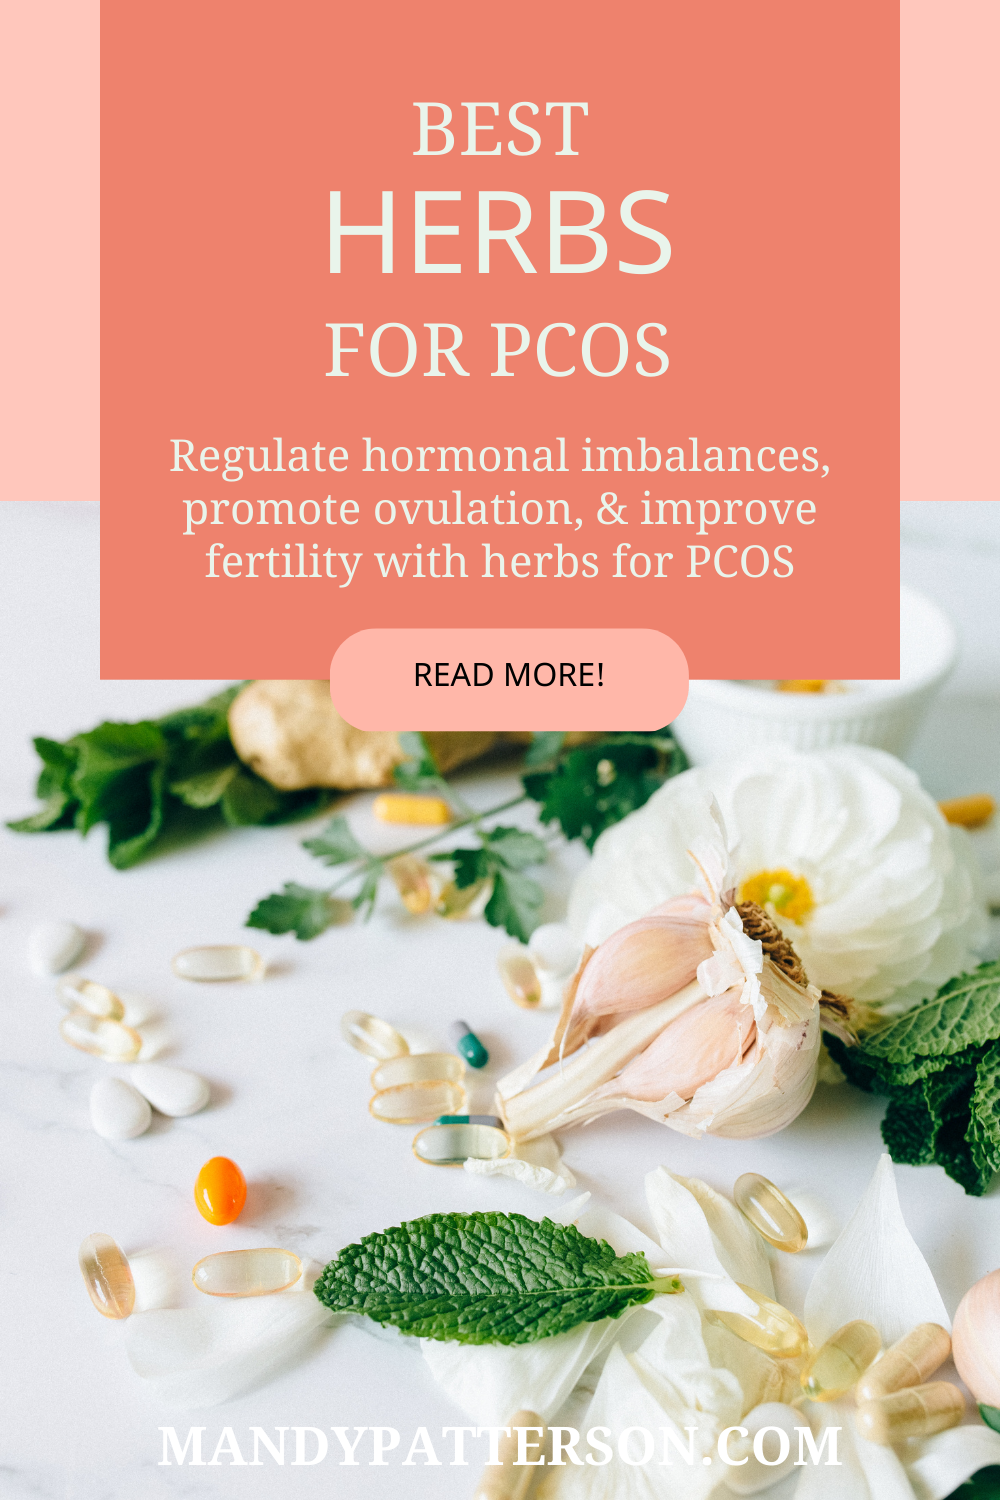 Best herbs for PCOS